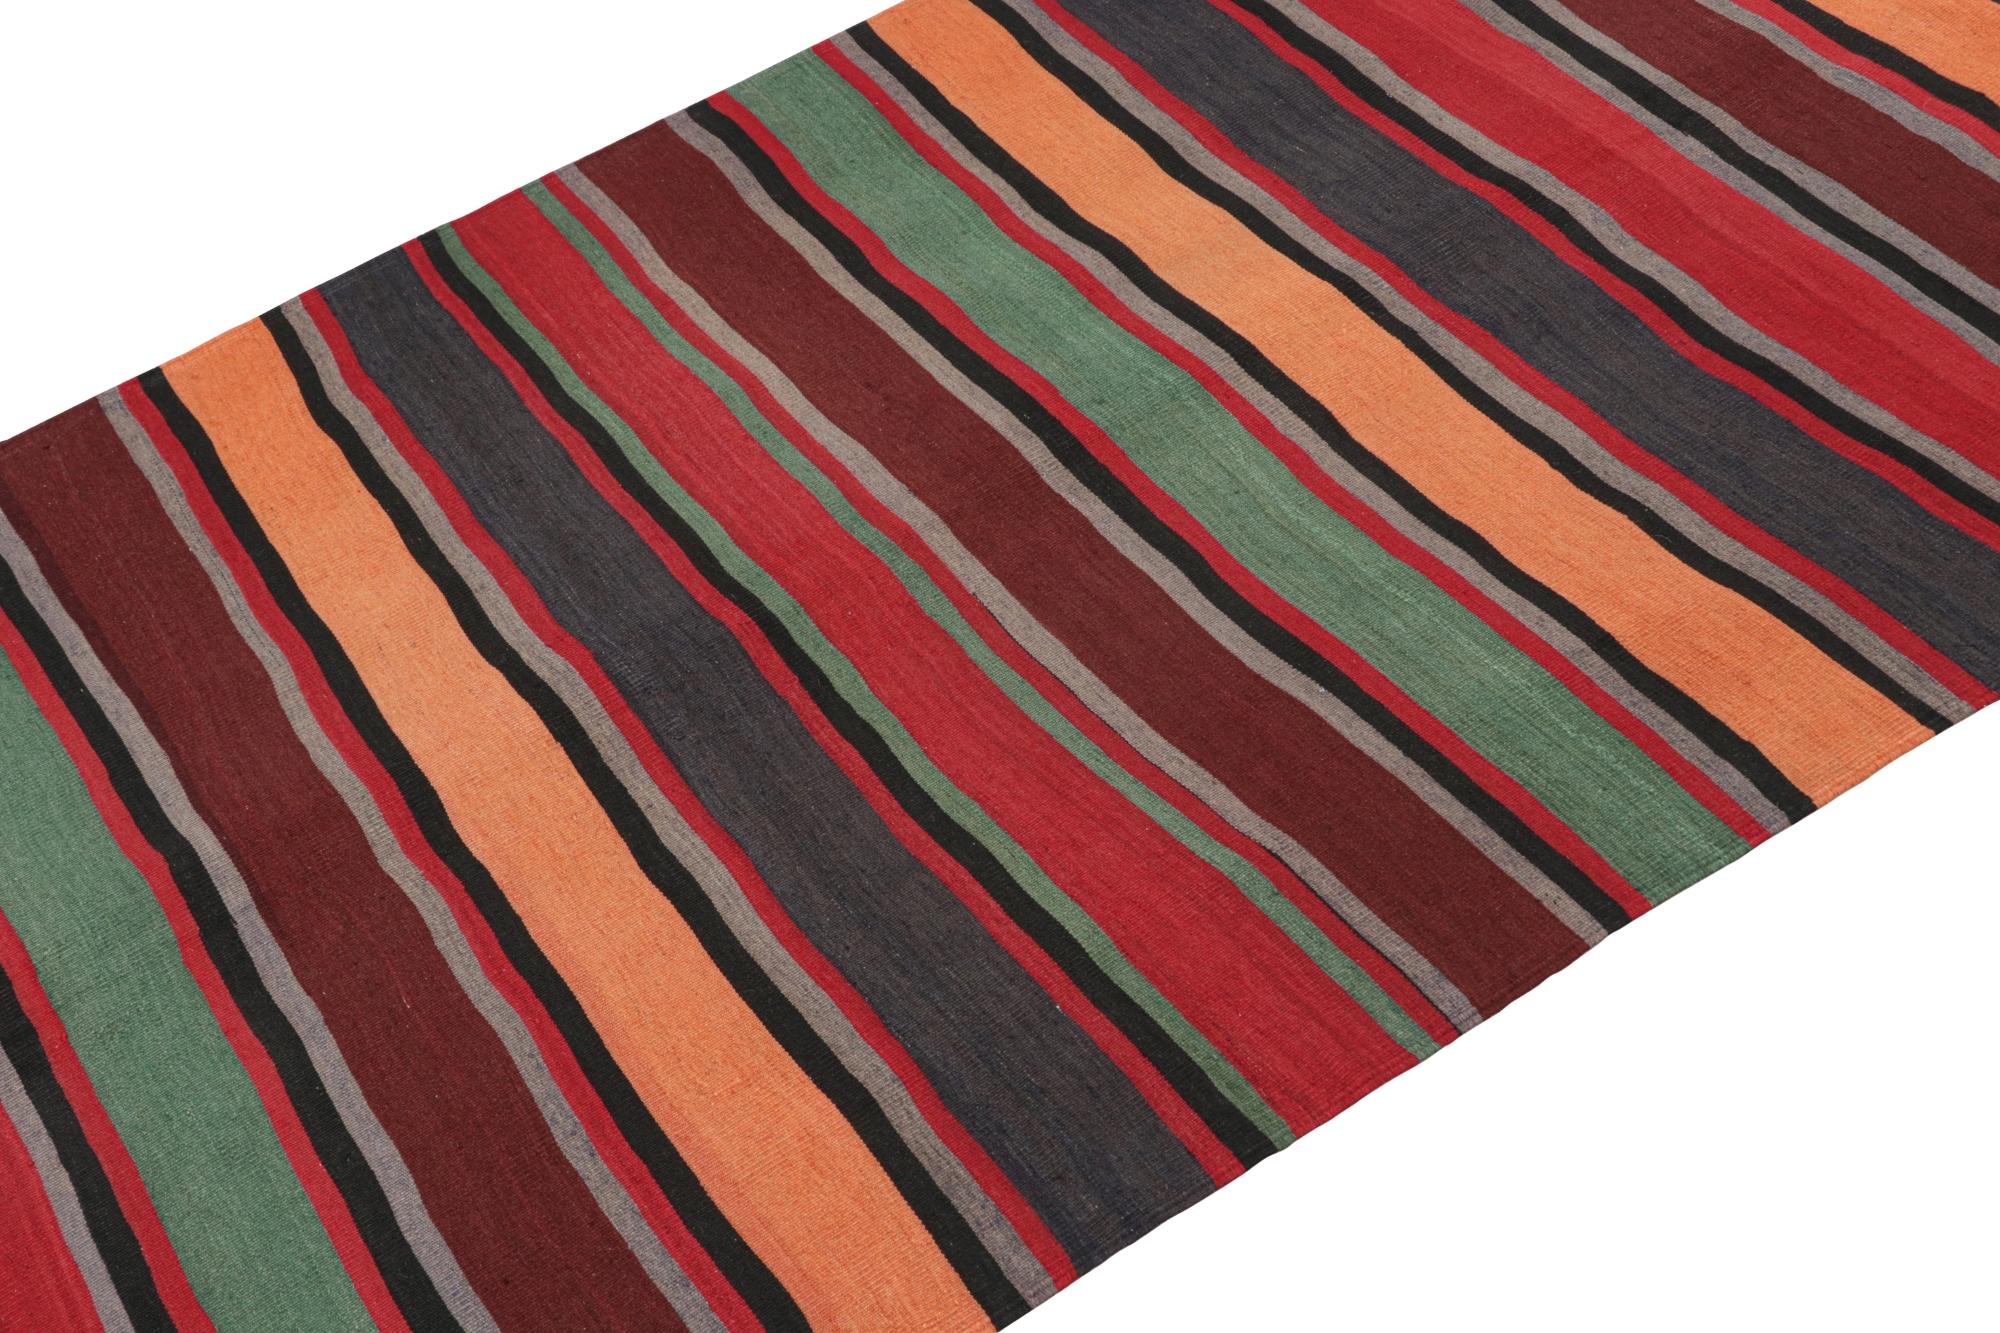 This vintage 5x13 Persian Bidjar Kilim is handwoven in wool, and originates circa 1950-1960.

On the Design:

This flatweave enjoys polychromatic stripes favoring orange, red, blue, brown & green colorways.
It’s a warm, vibrant choice with vast